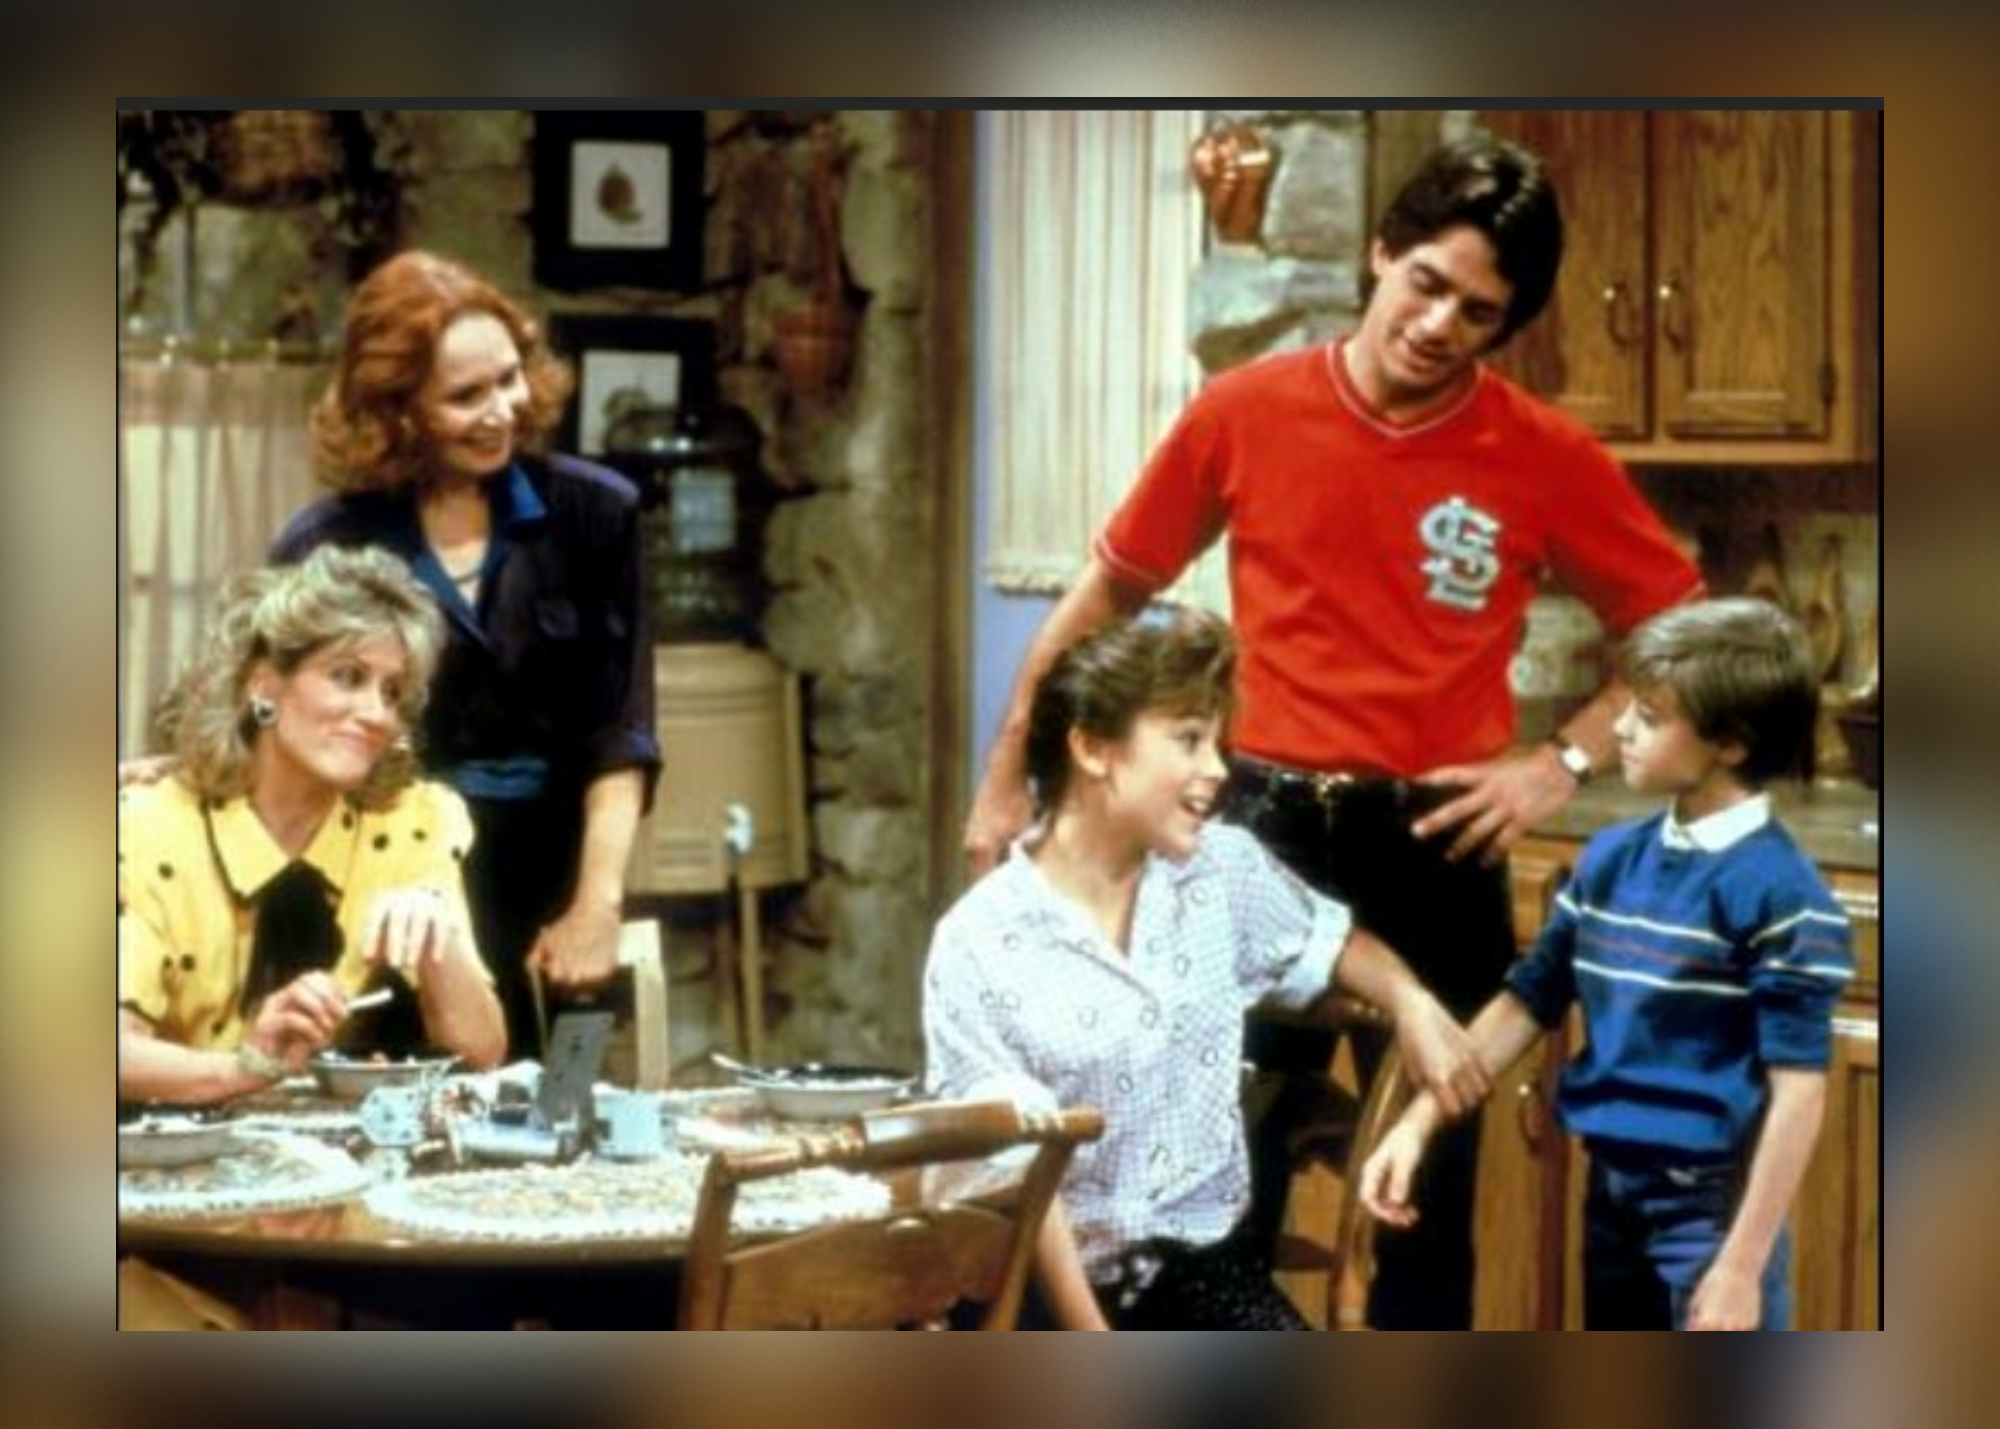 “Who’s The Boss” Sequel With Tony Danza And Alyssa Milano In The Works